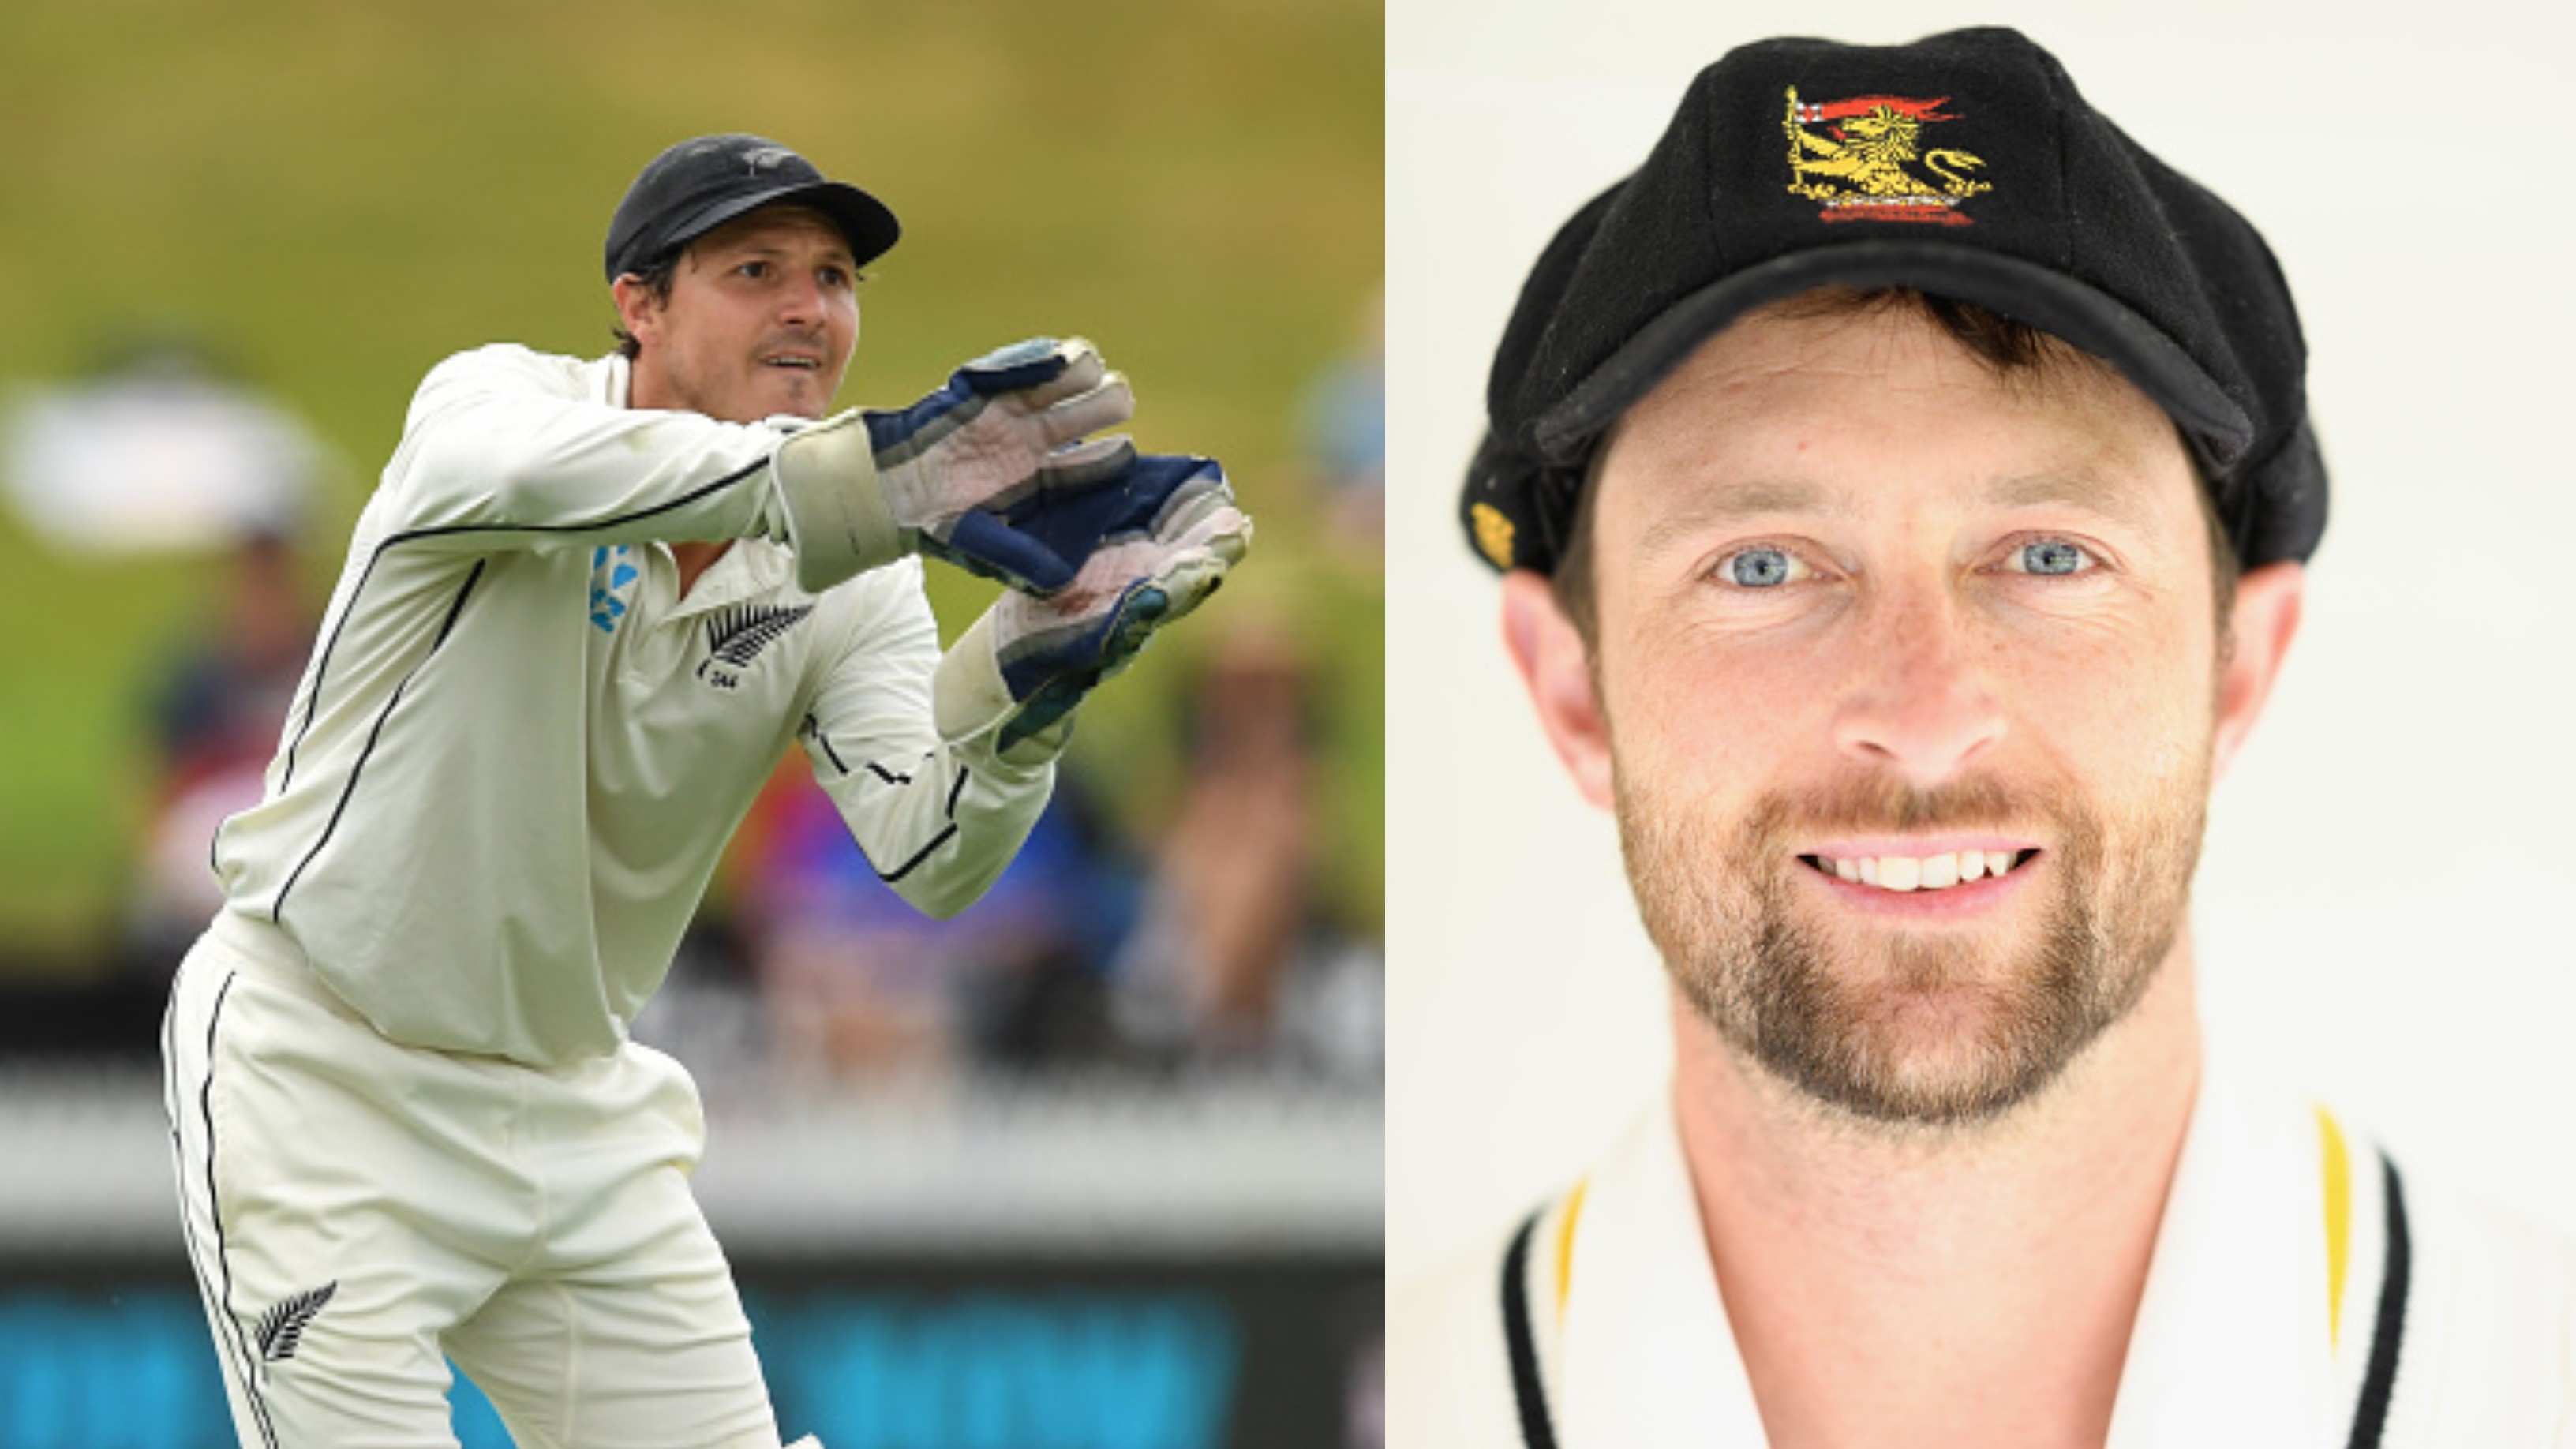 NZ v WI 2020: Devon Conway named as injury cover for BJ Watling for 1st Test in Hamilton